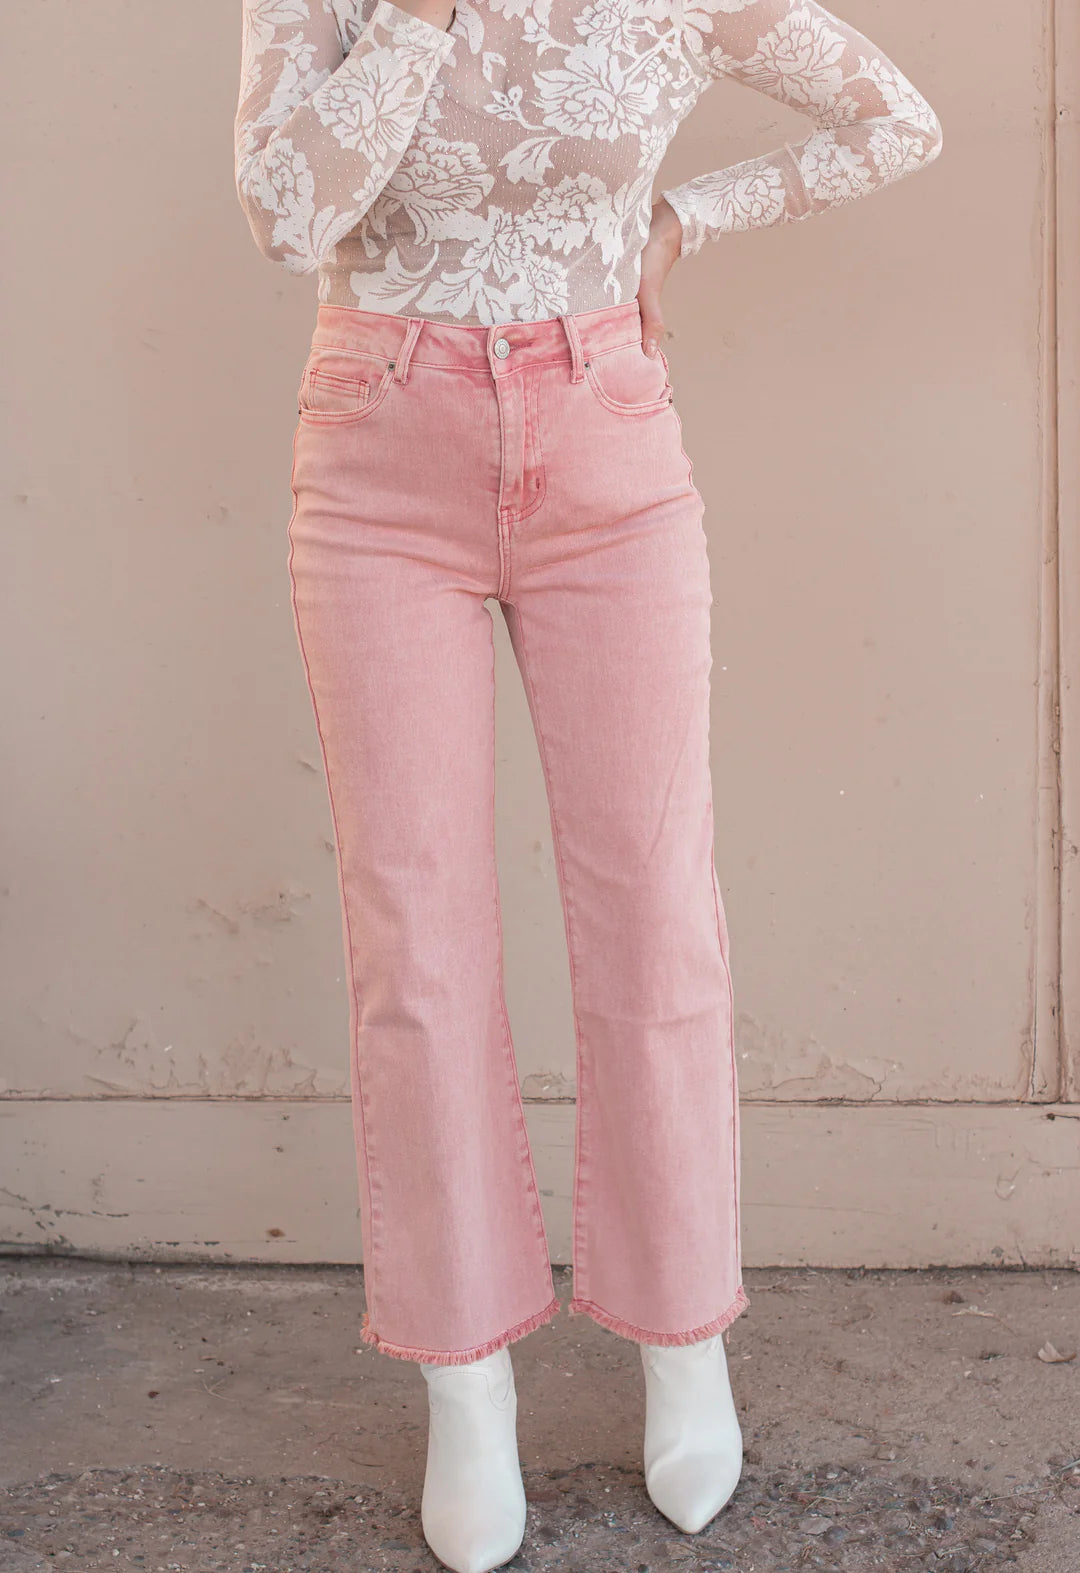 ***DOORBUSTER*** It's About Time 2 Colored Denim Wide Leg Jeans in Ash Rose